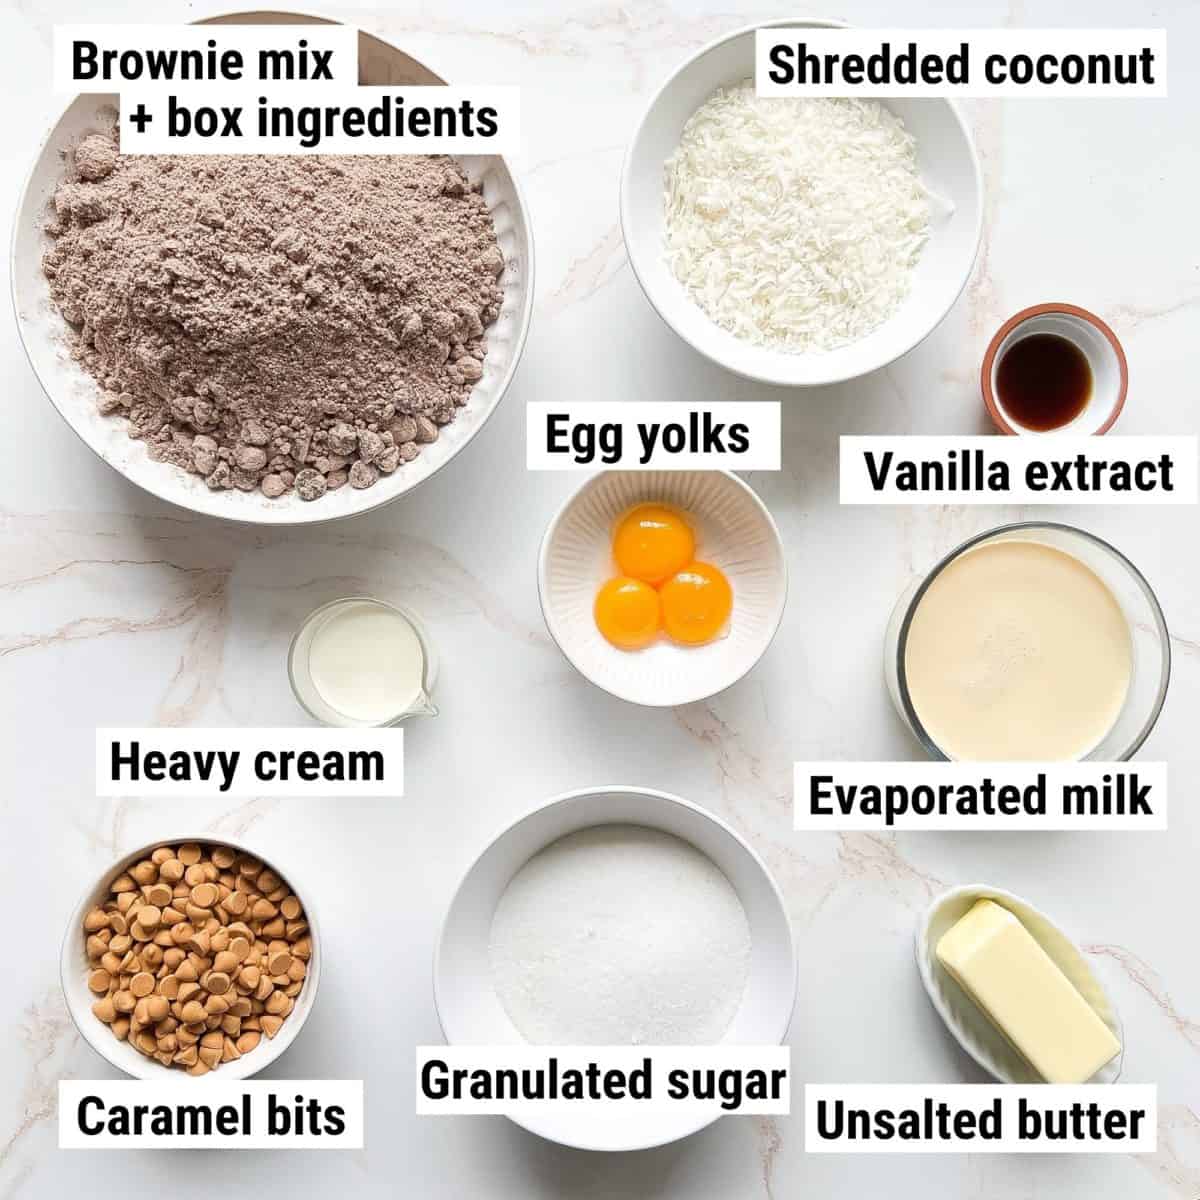 The recipe ingredients used to make German chocolate brownies spread out on a table.